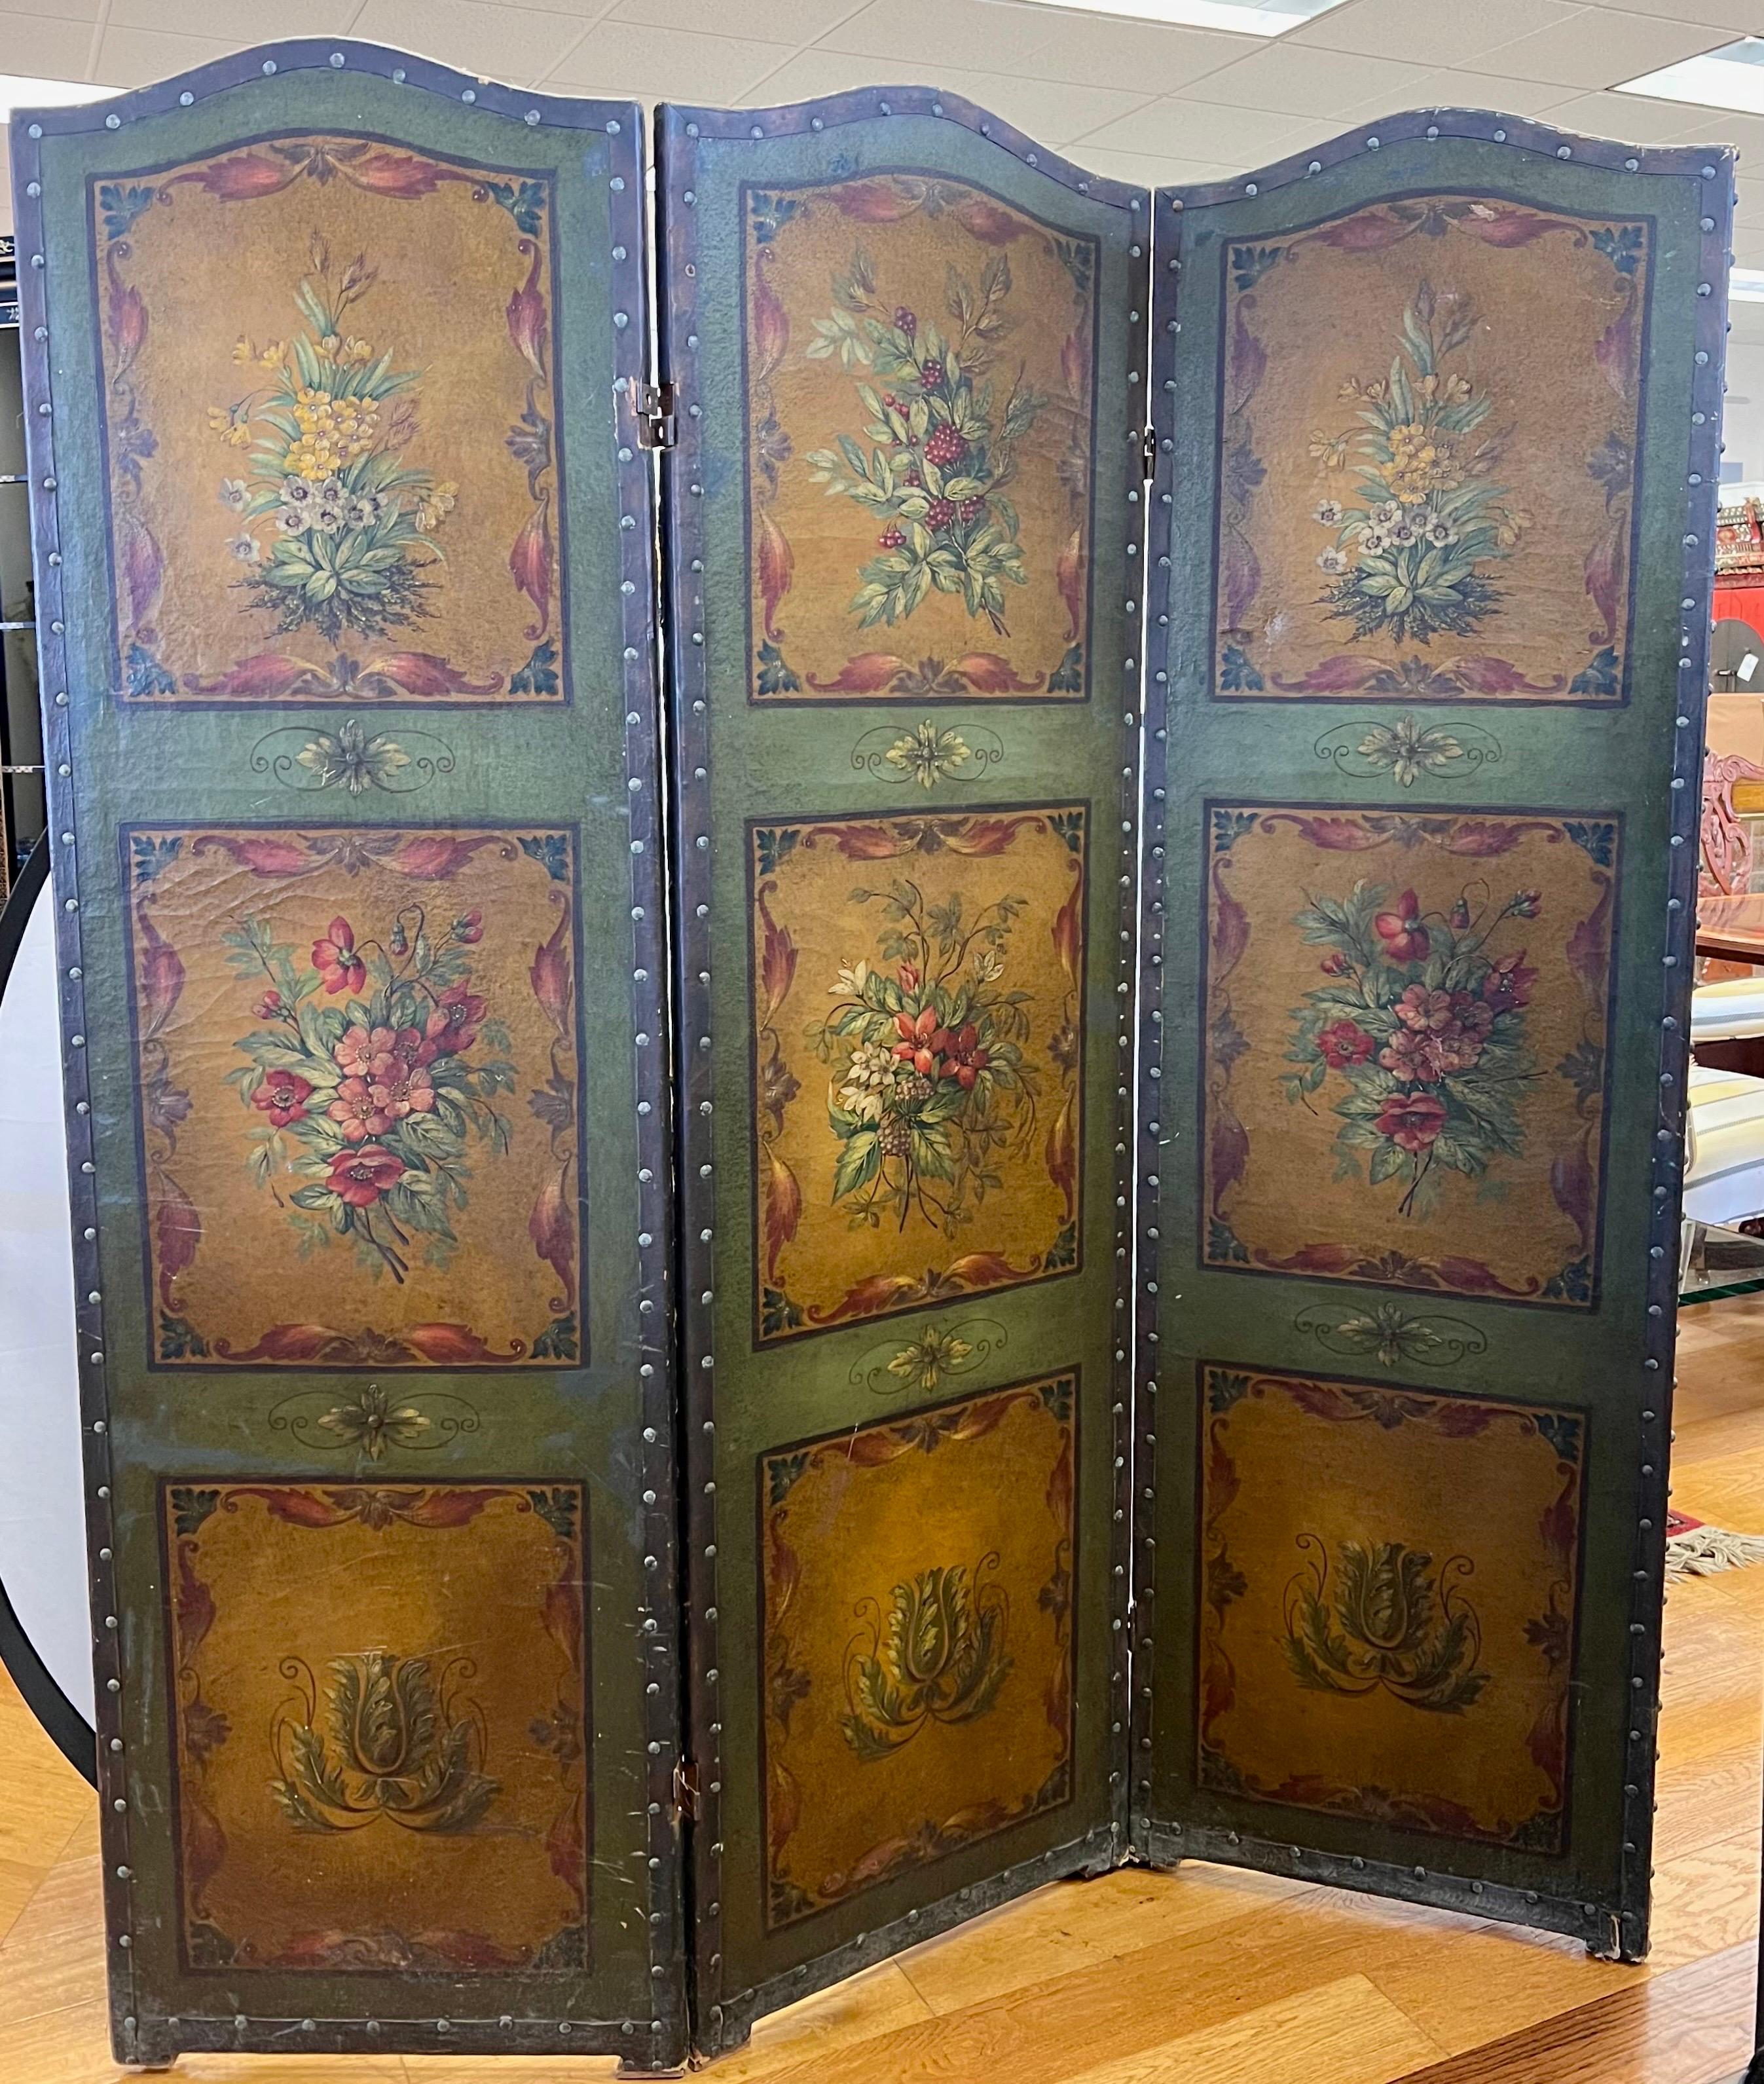 Antique 19th century French hand painted floral hinged three panel arched leather screen with brass tack trimming.  Each panel is 20